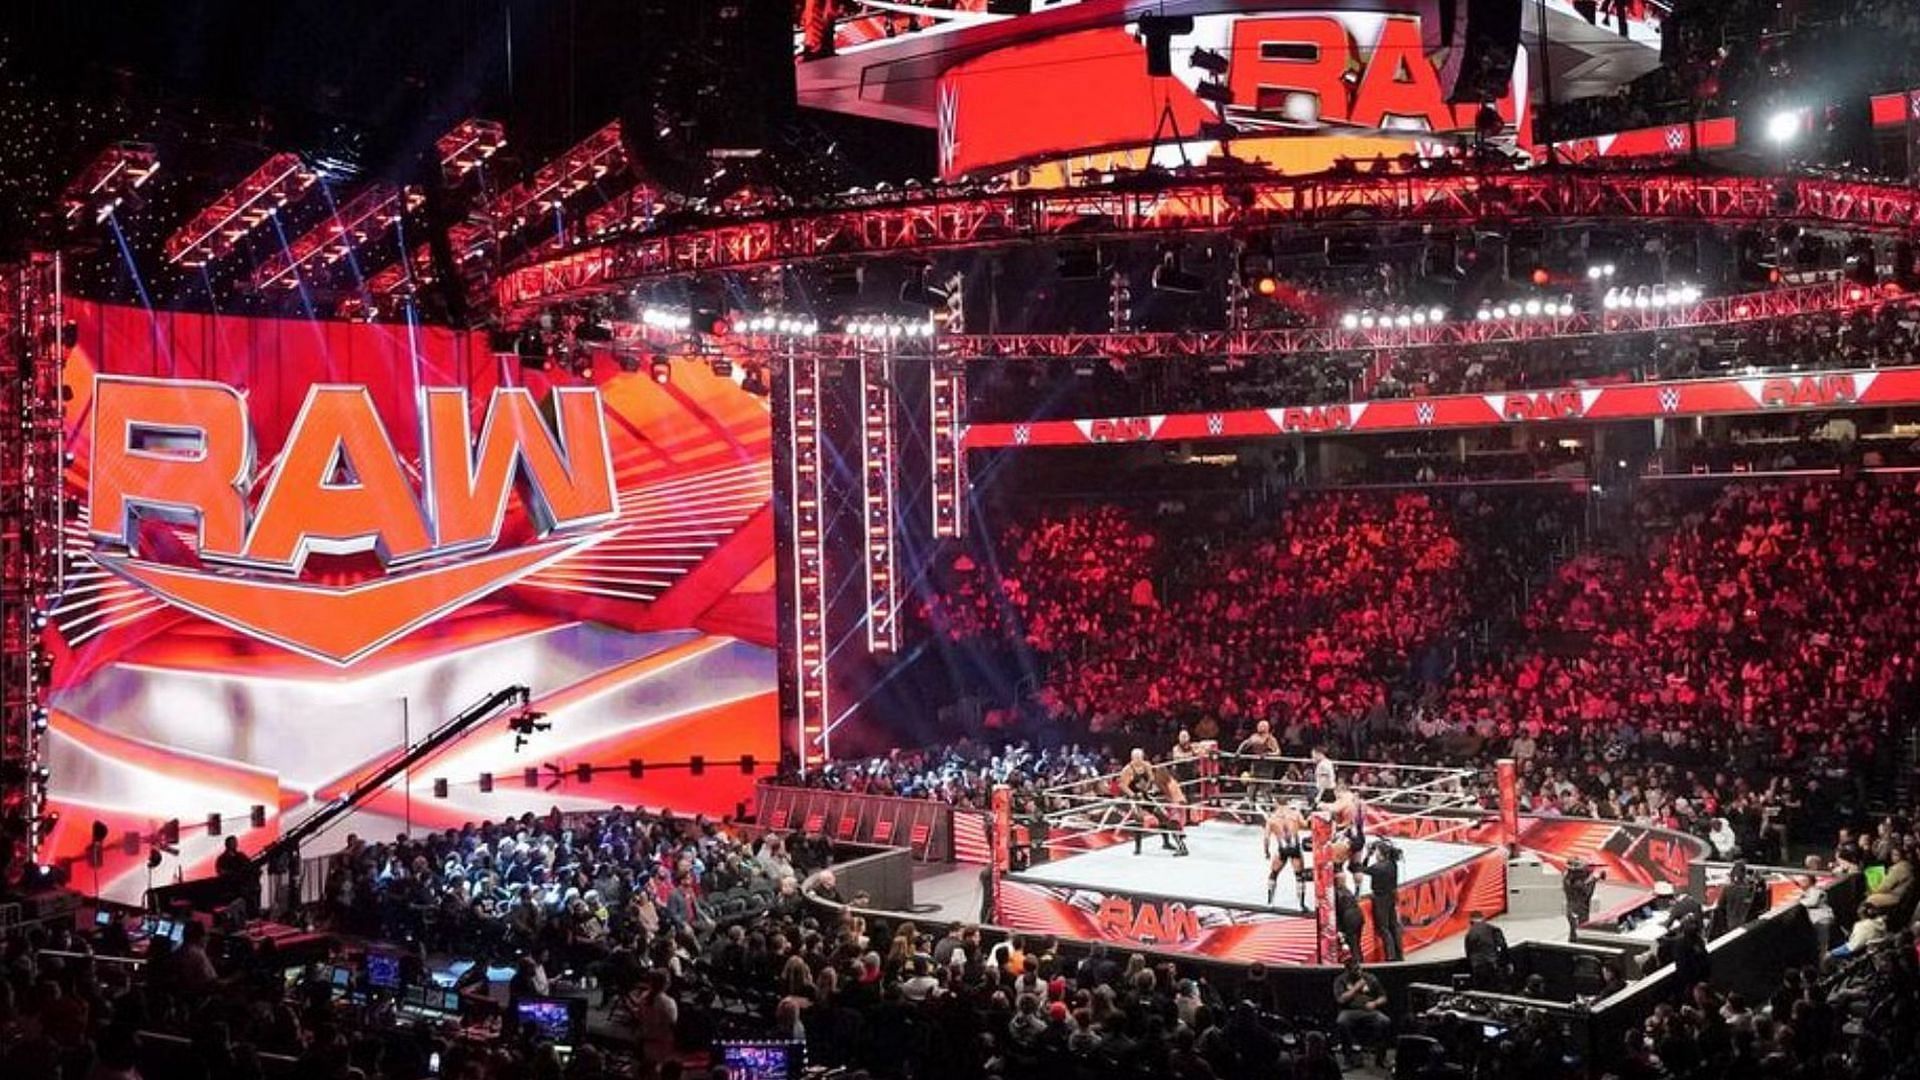 The WWE RAW logo, ring and set on display in arena